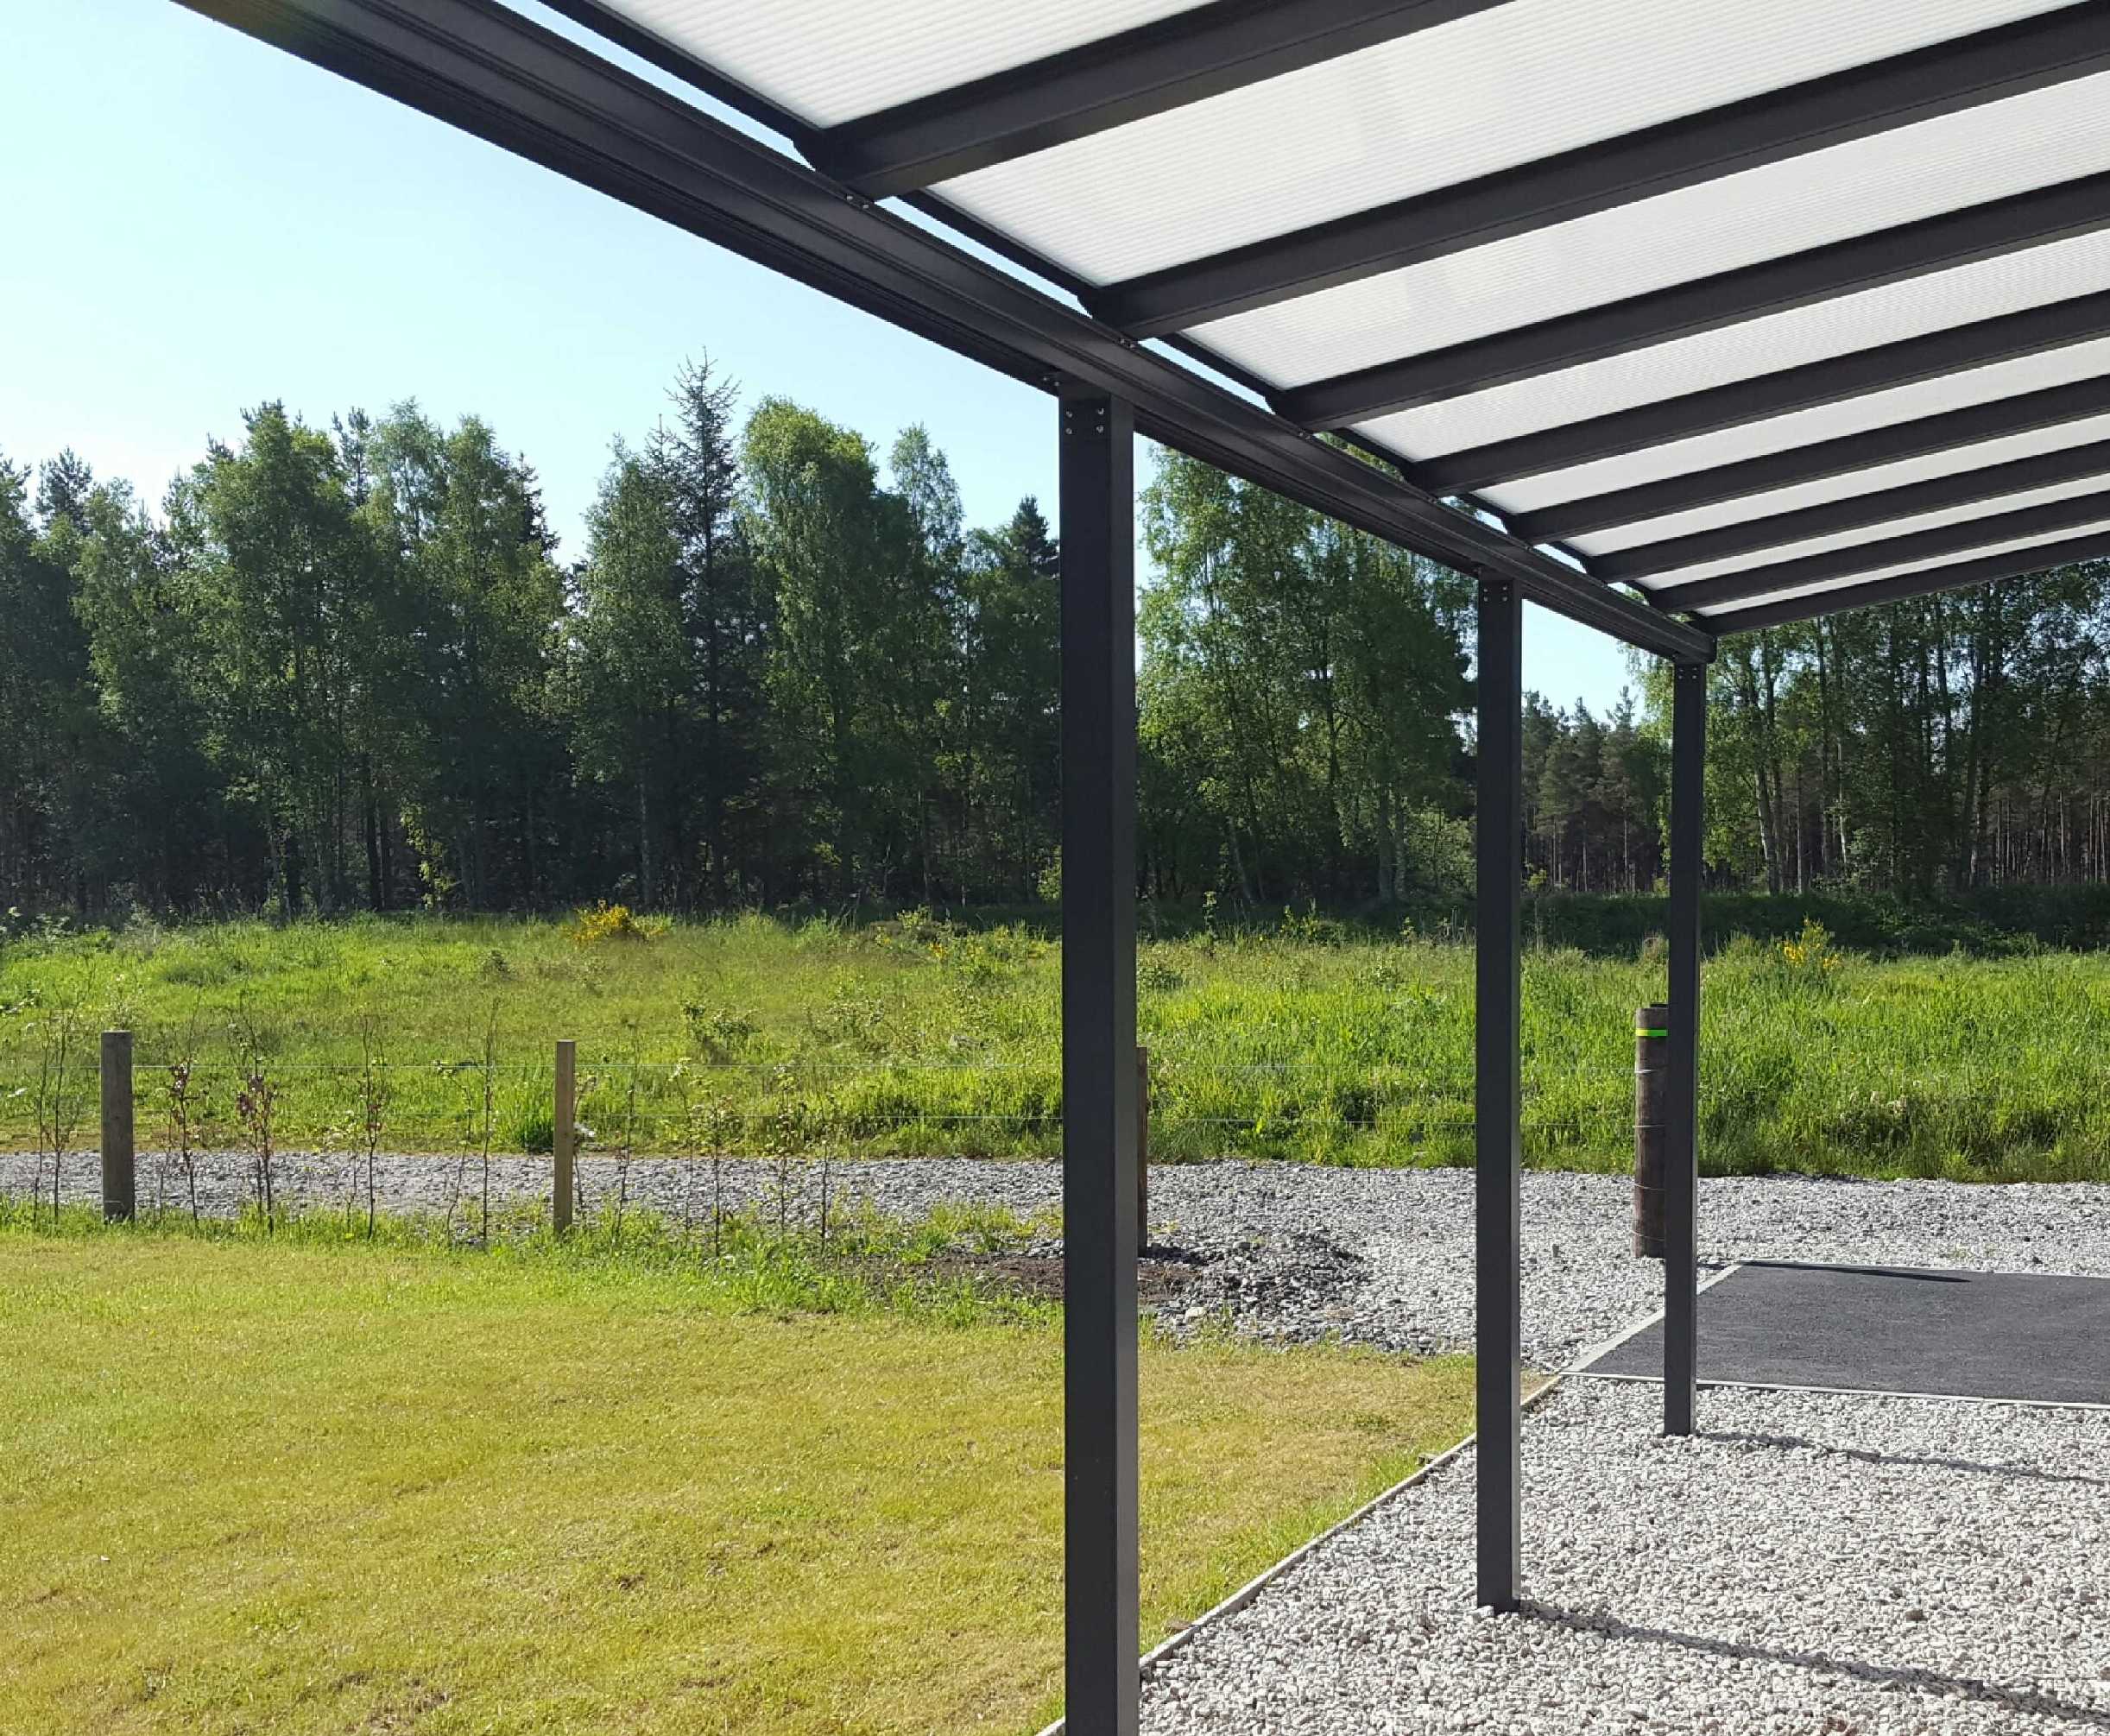 SPECIAL OFFER Omega Smart Lean-To Canopy, Anthracite Grey, 16mm Polycarbonate Glazing - 6.0m (W) x 1.5m (P), (3) Supporting Posts